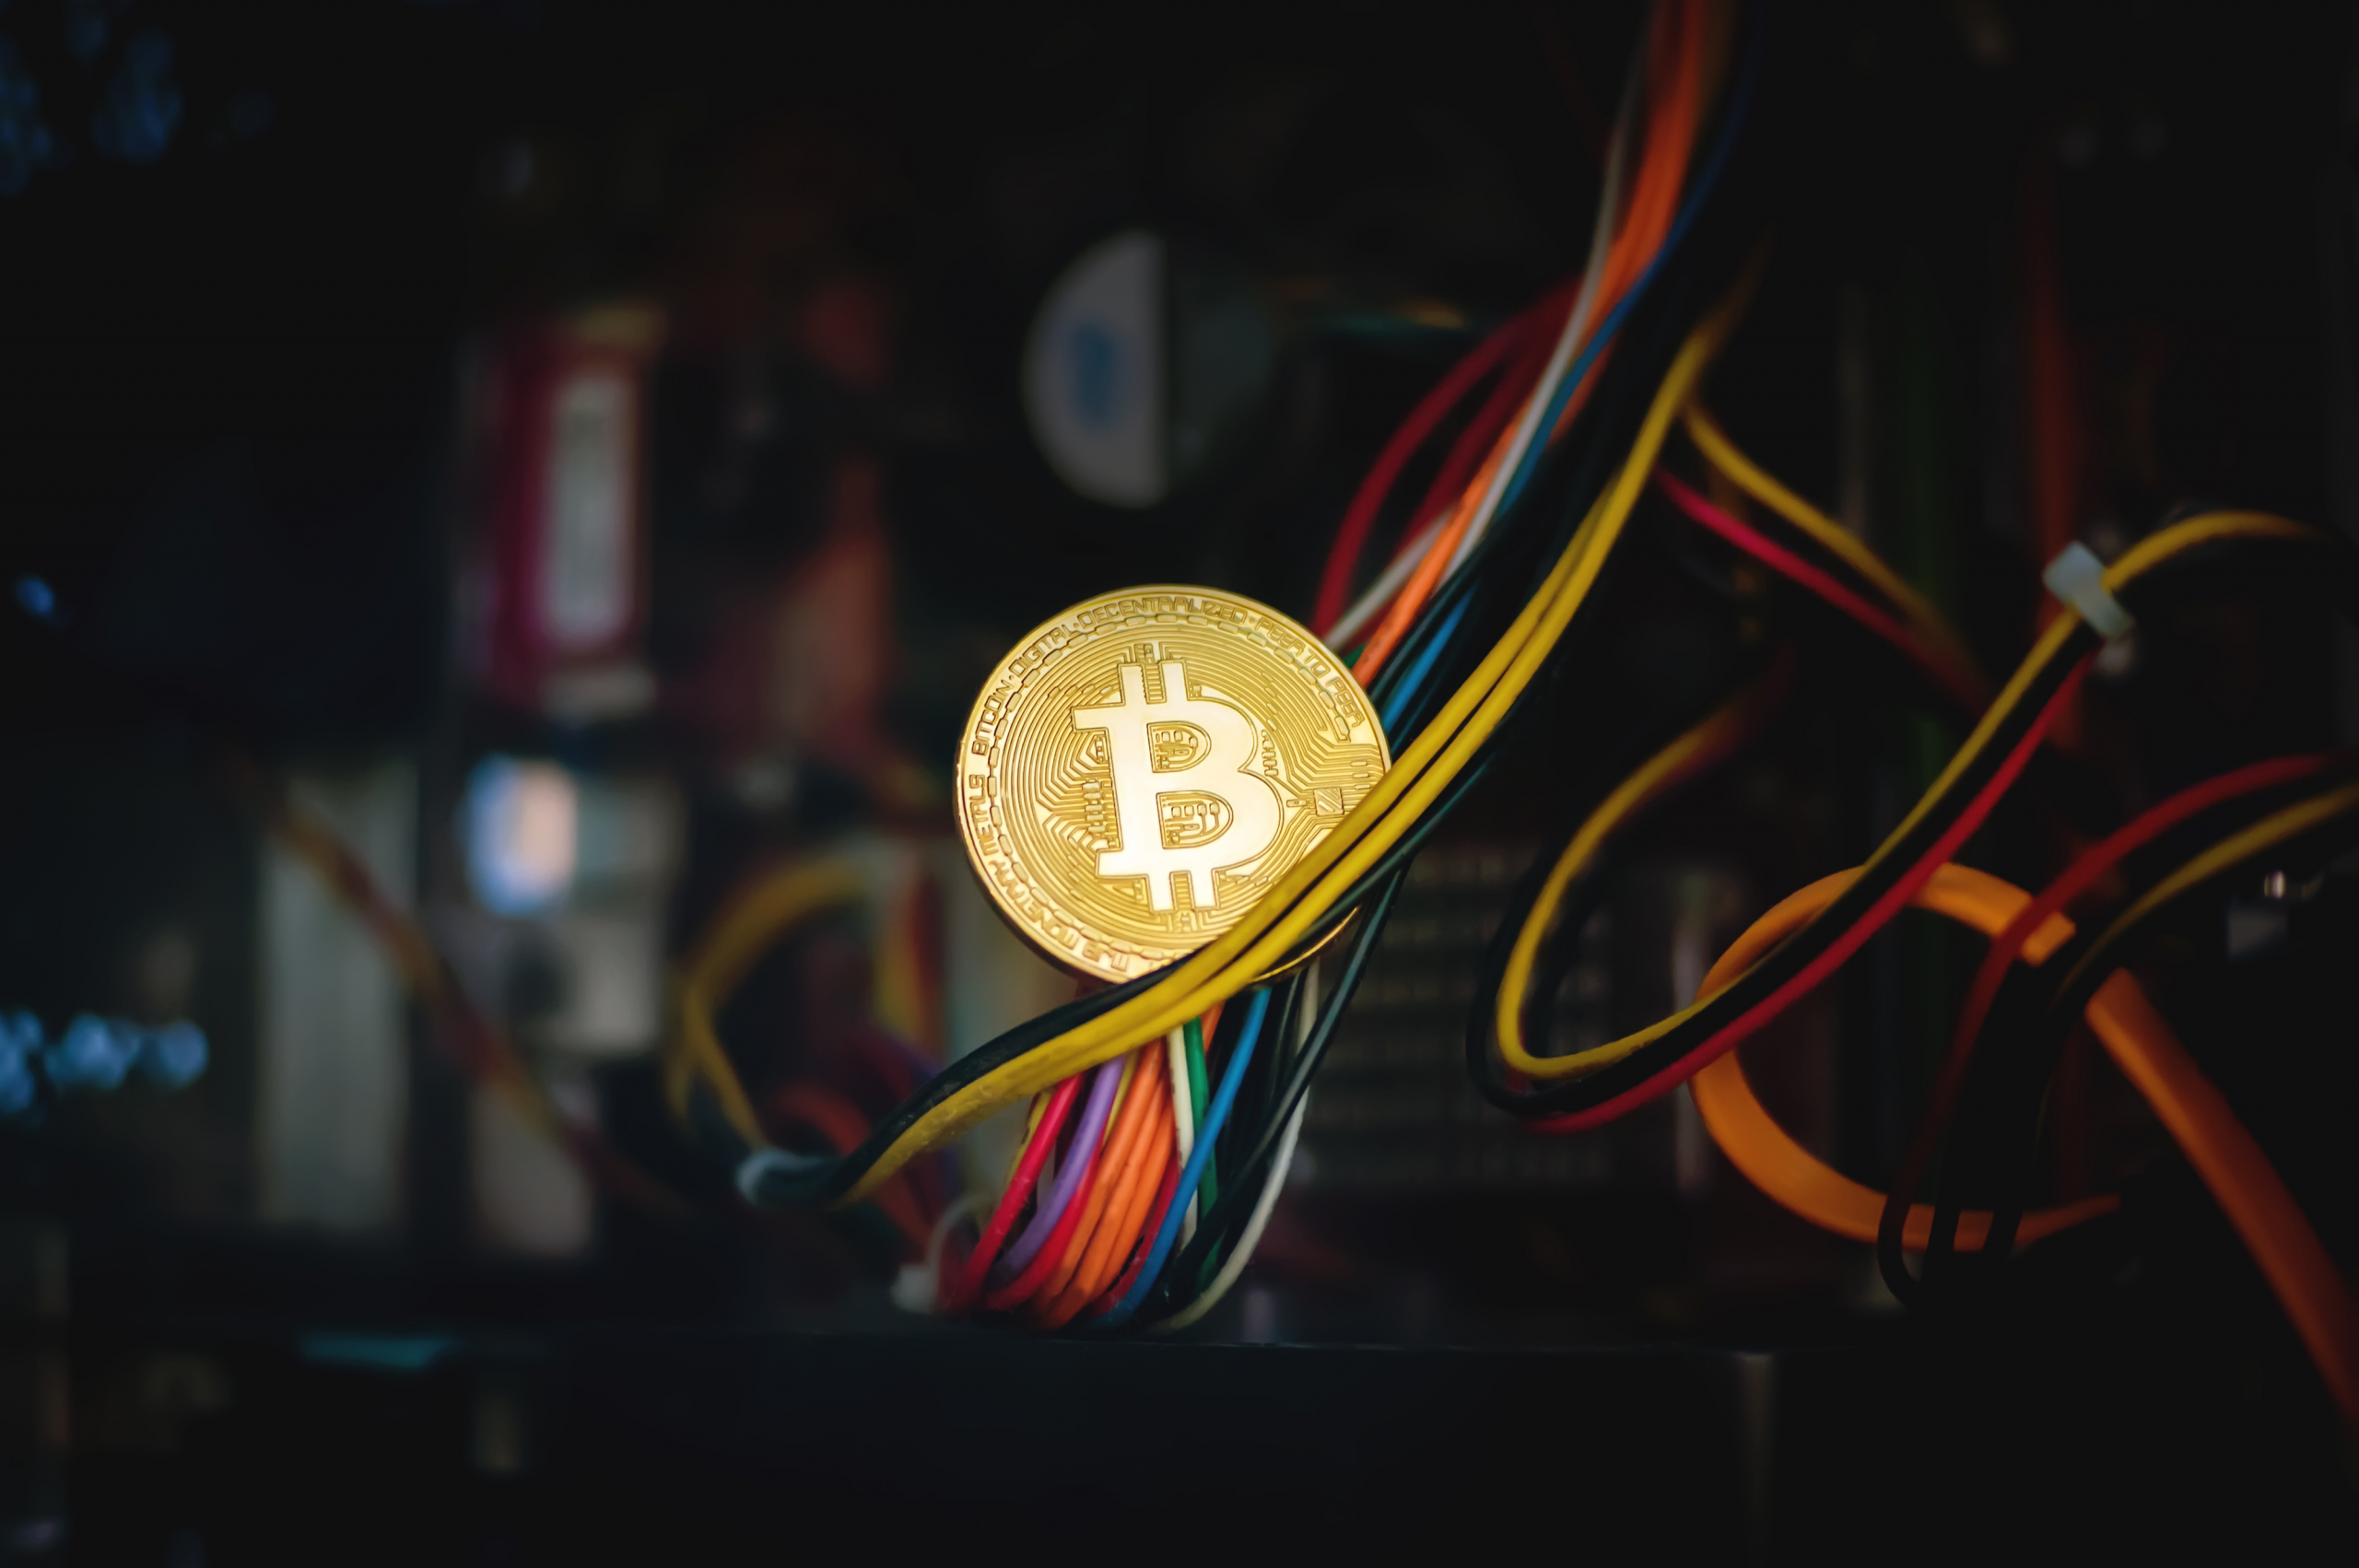 Bitcoin miners have sold full May proceeds
